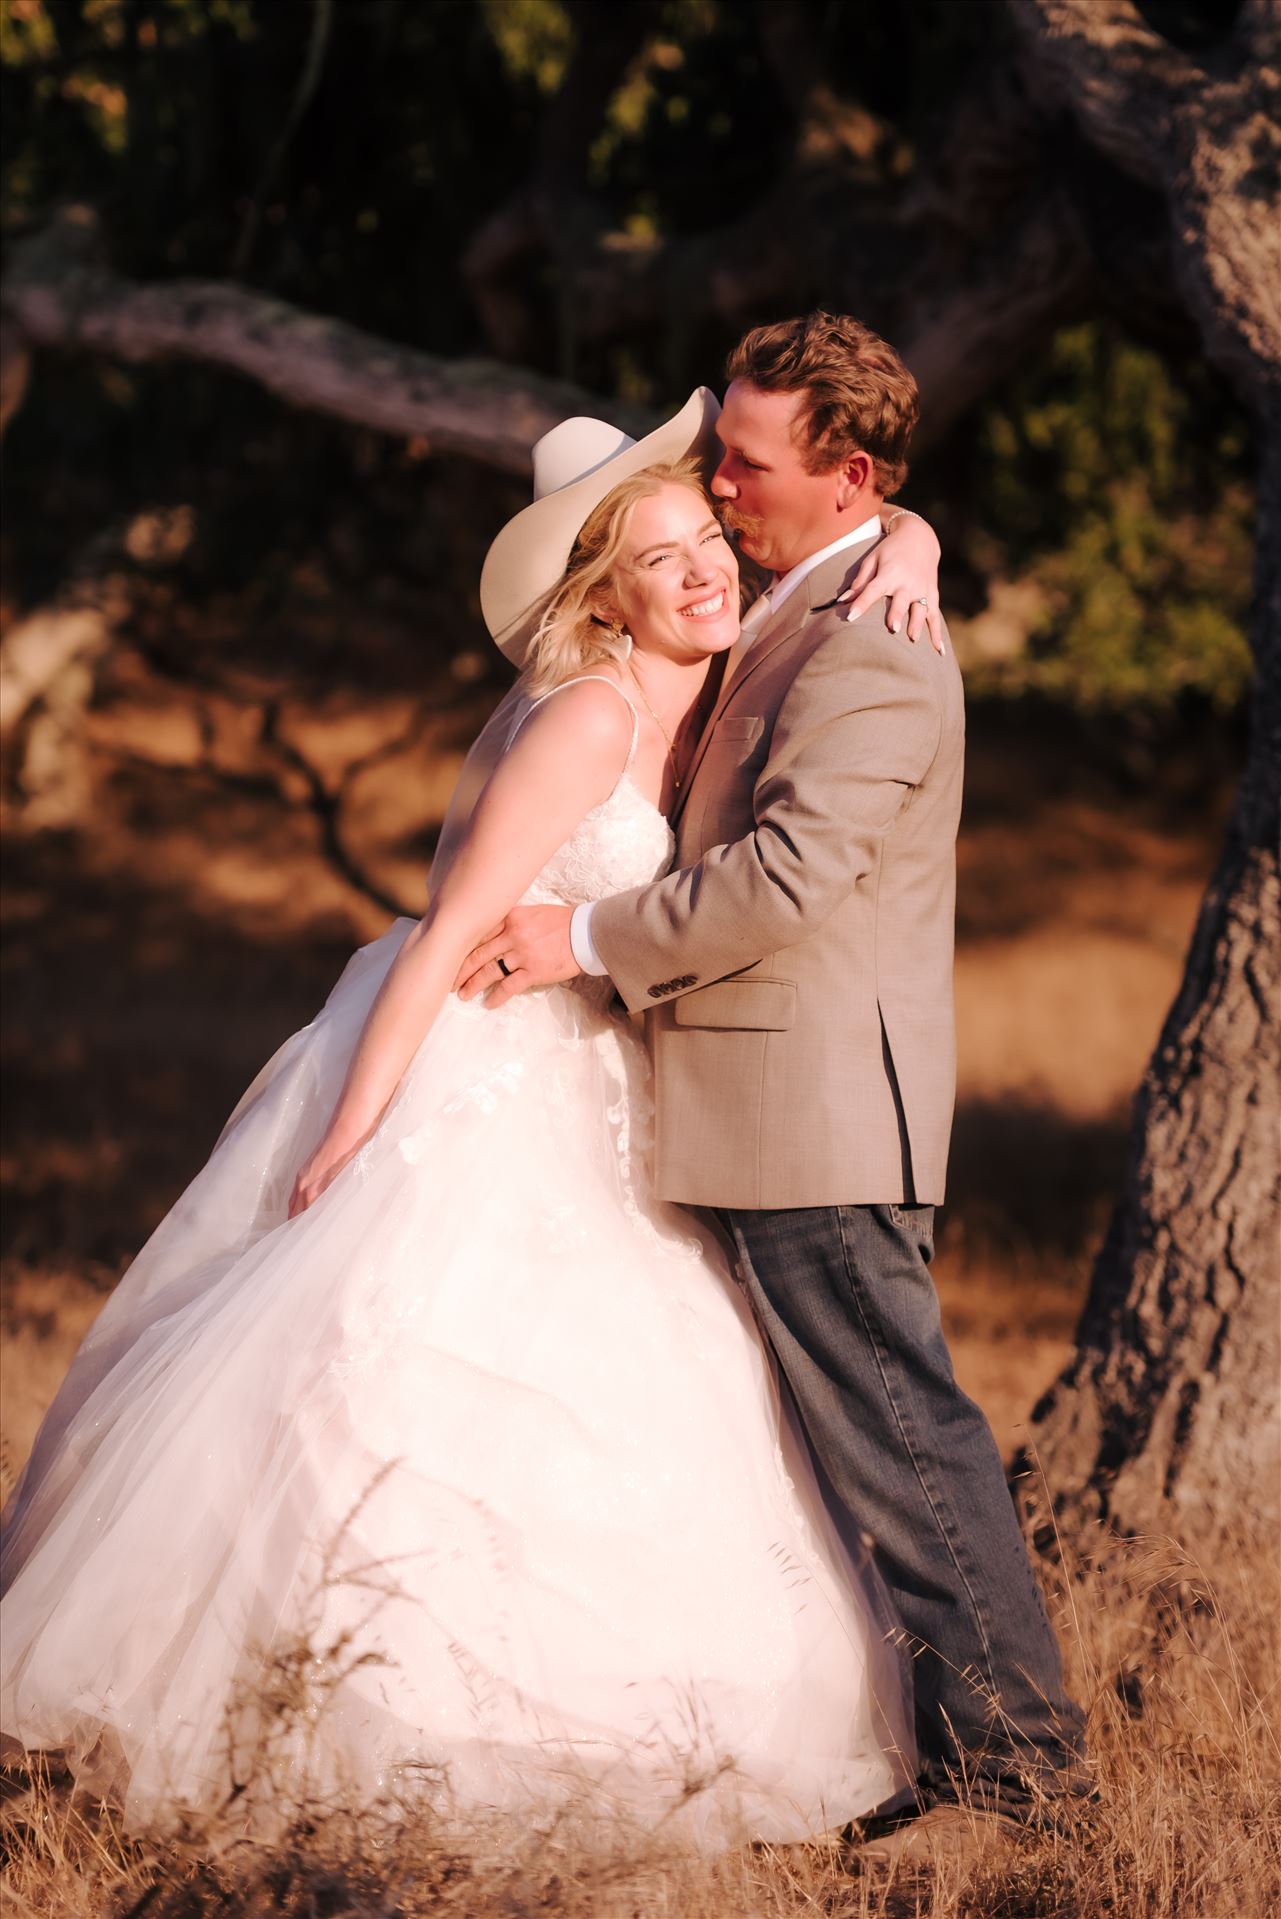 FW-6247.JPG Sarah Williams of Mirror's Edge Photography, a San Luis Obispo and Santa Barbara County Wedding and Engagement Photographer, captures Katie and Joe's country chic wedding in Lompoc, California.  Country Bride and Groom. by Sarah Williams